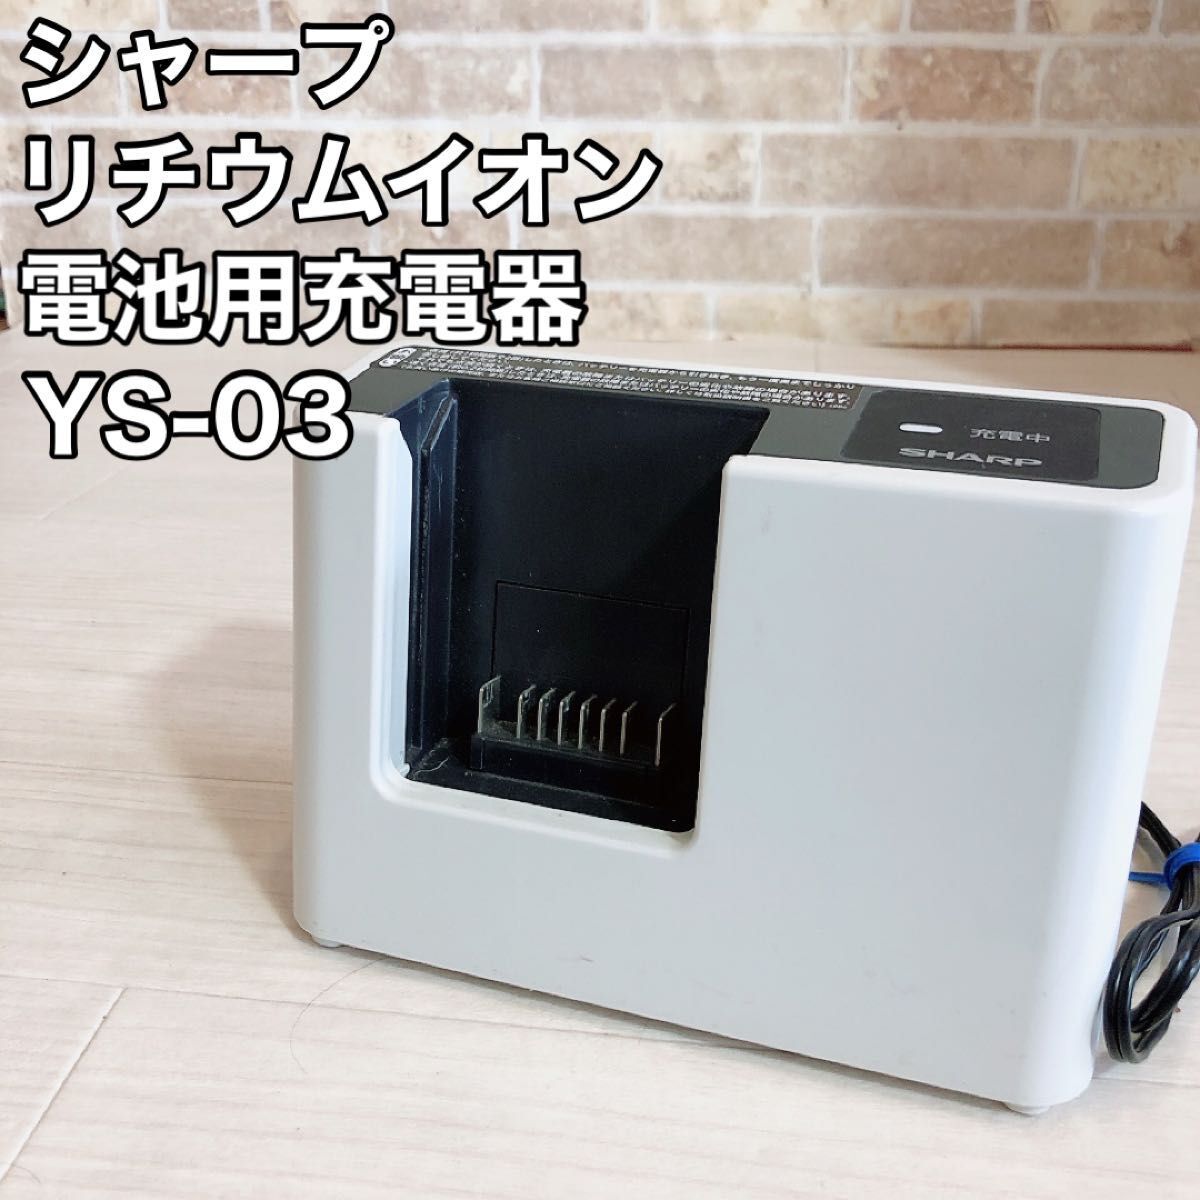  sharp lithium ion battery for charger YS-03